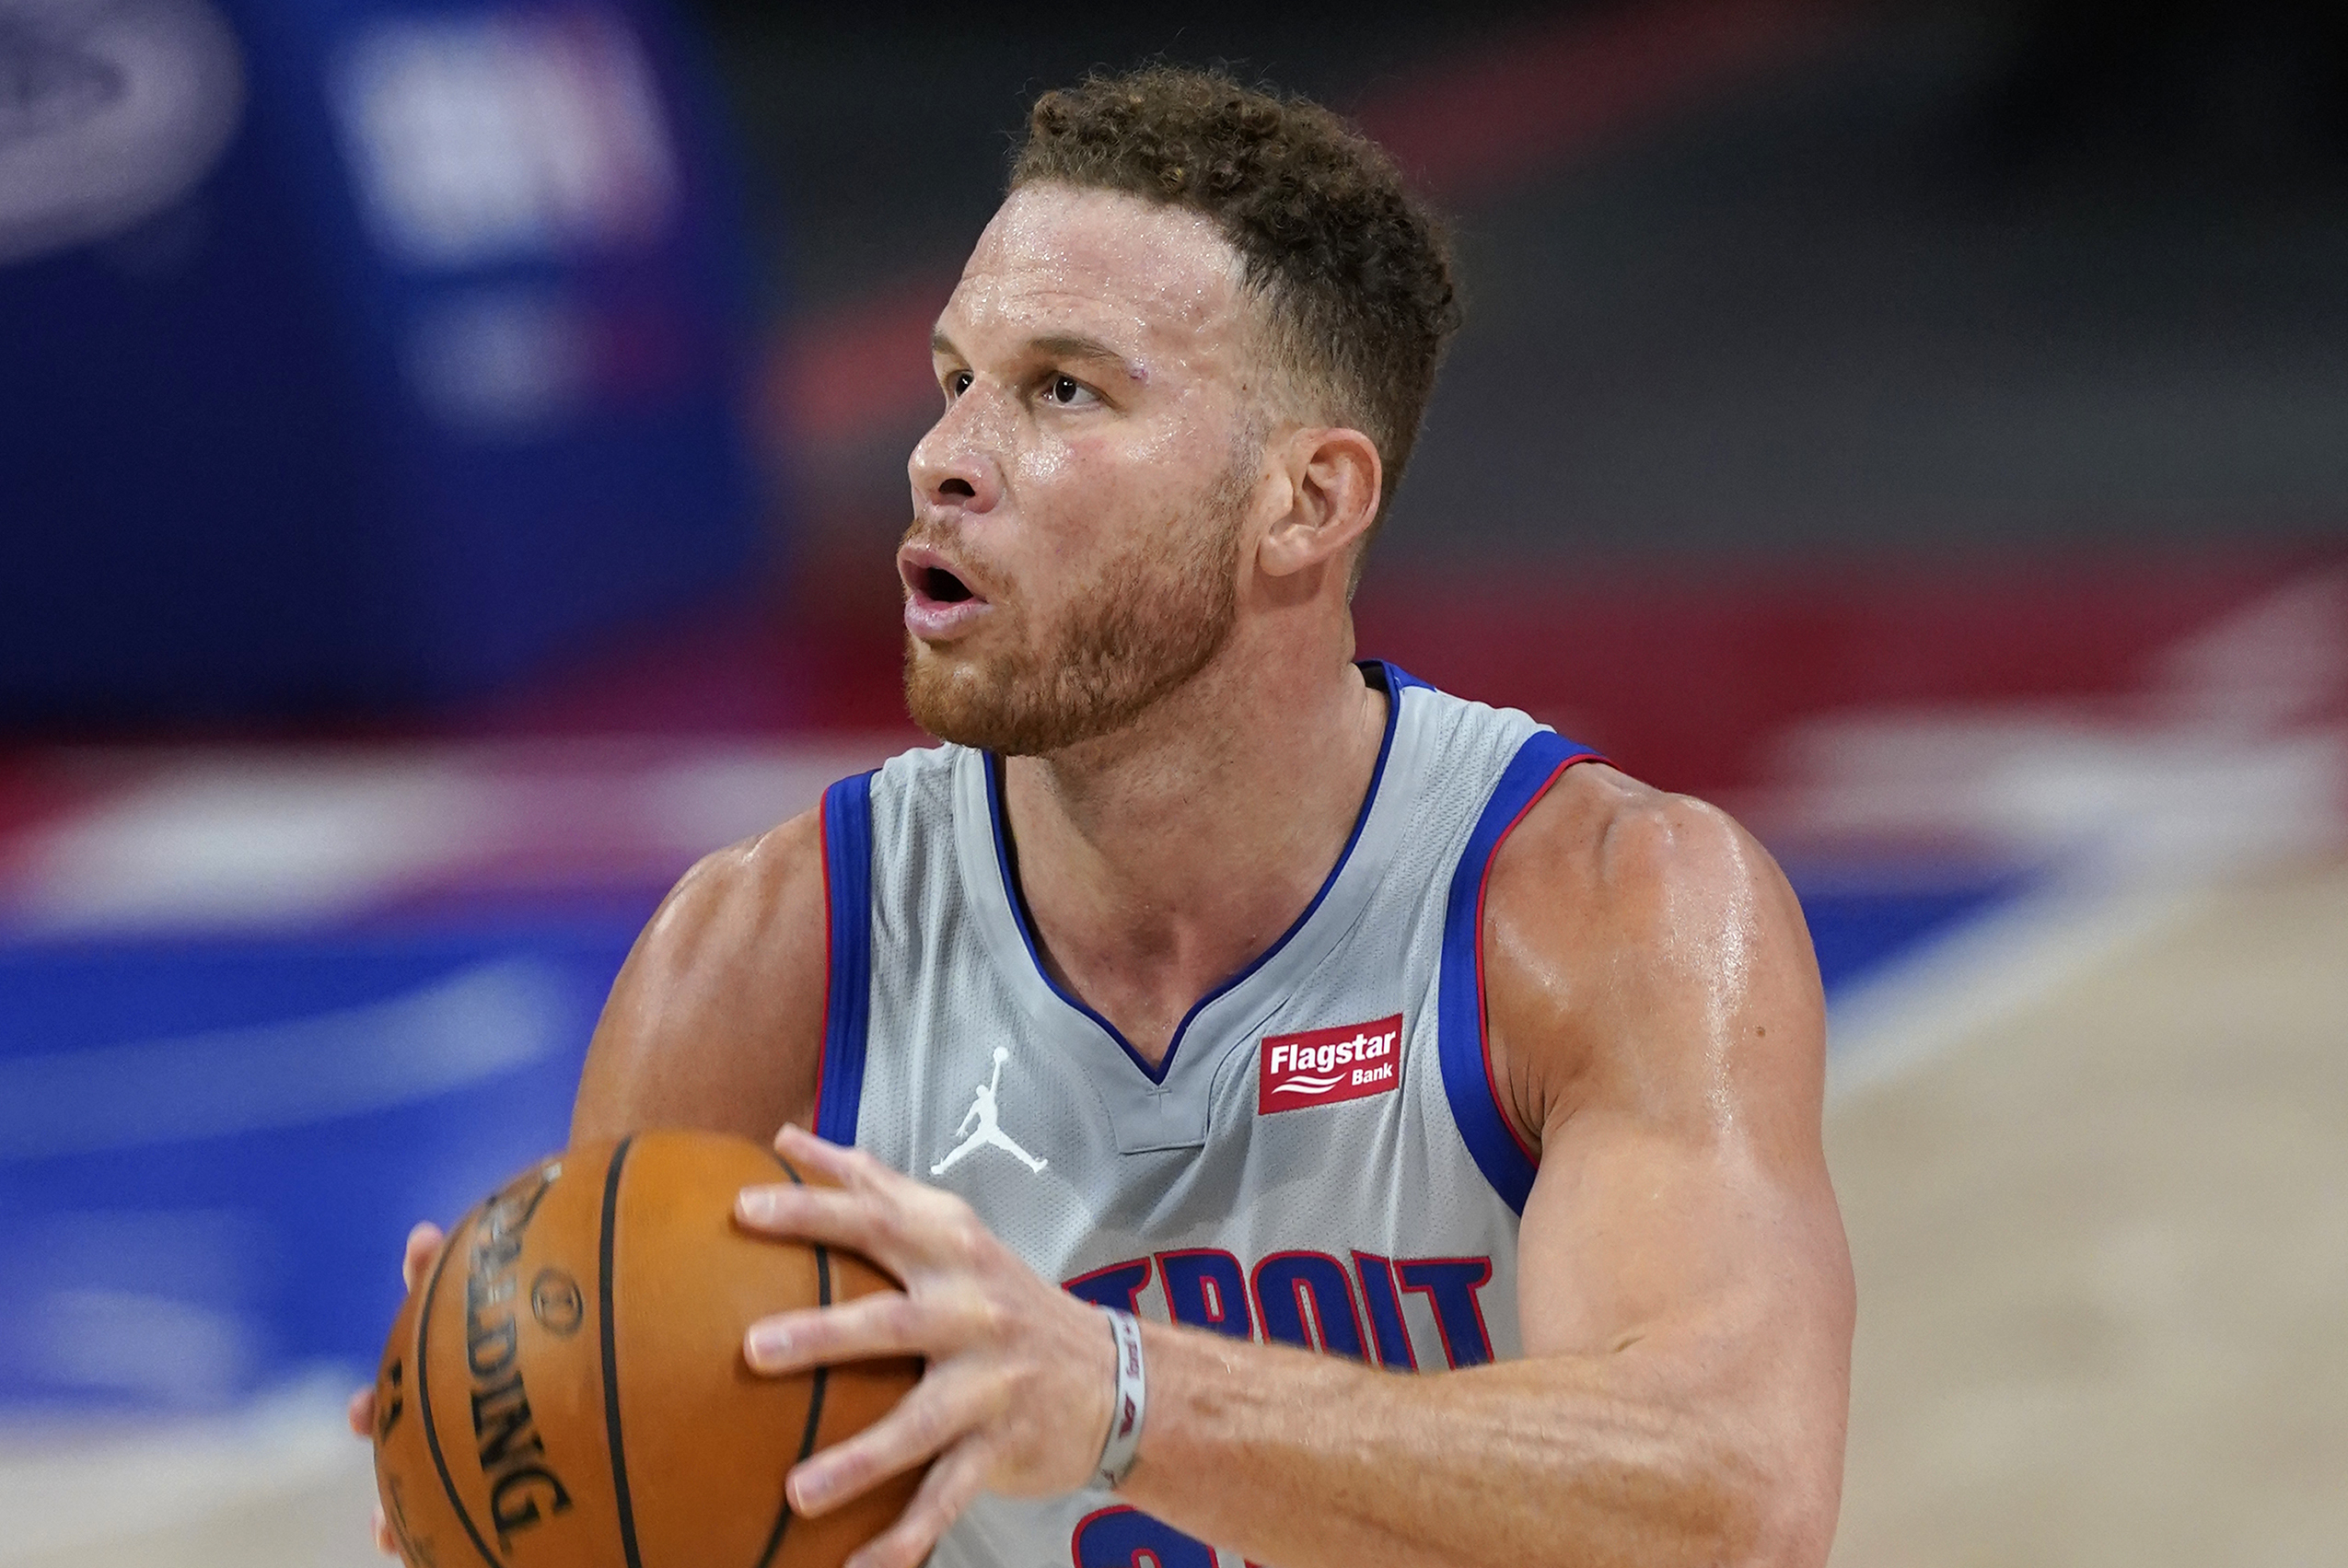 Blake Griffin officially joins Celtics on reported 1-year deal